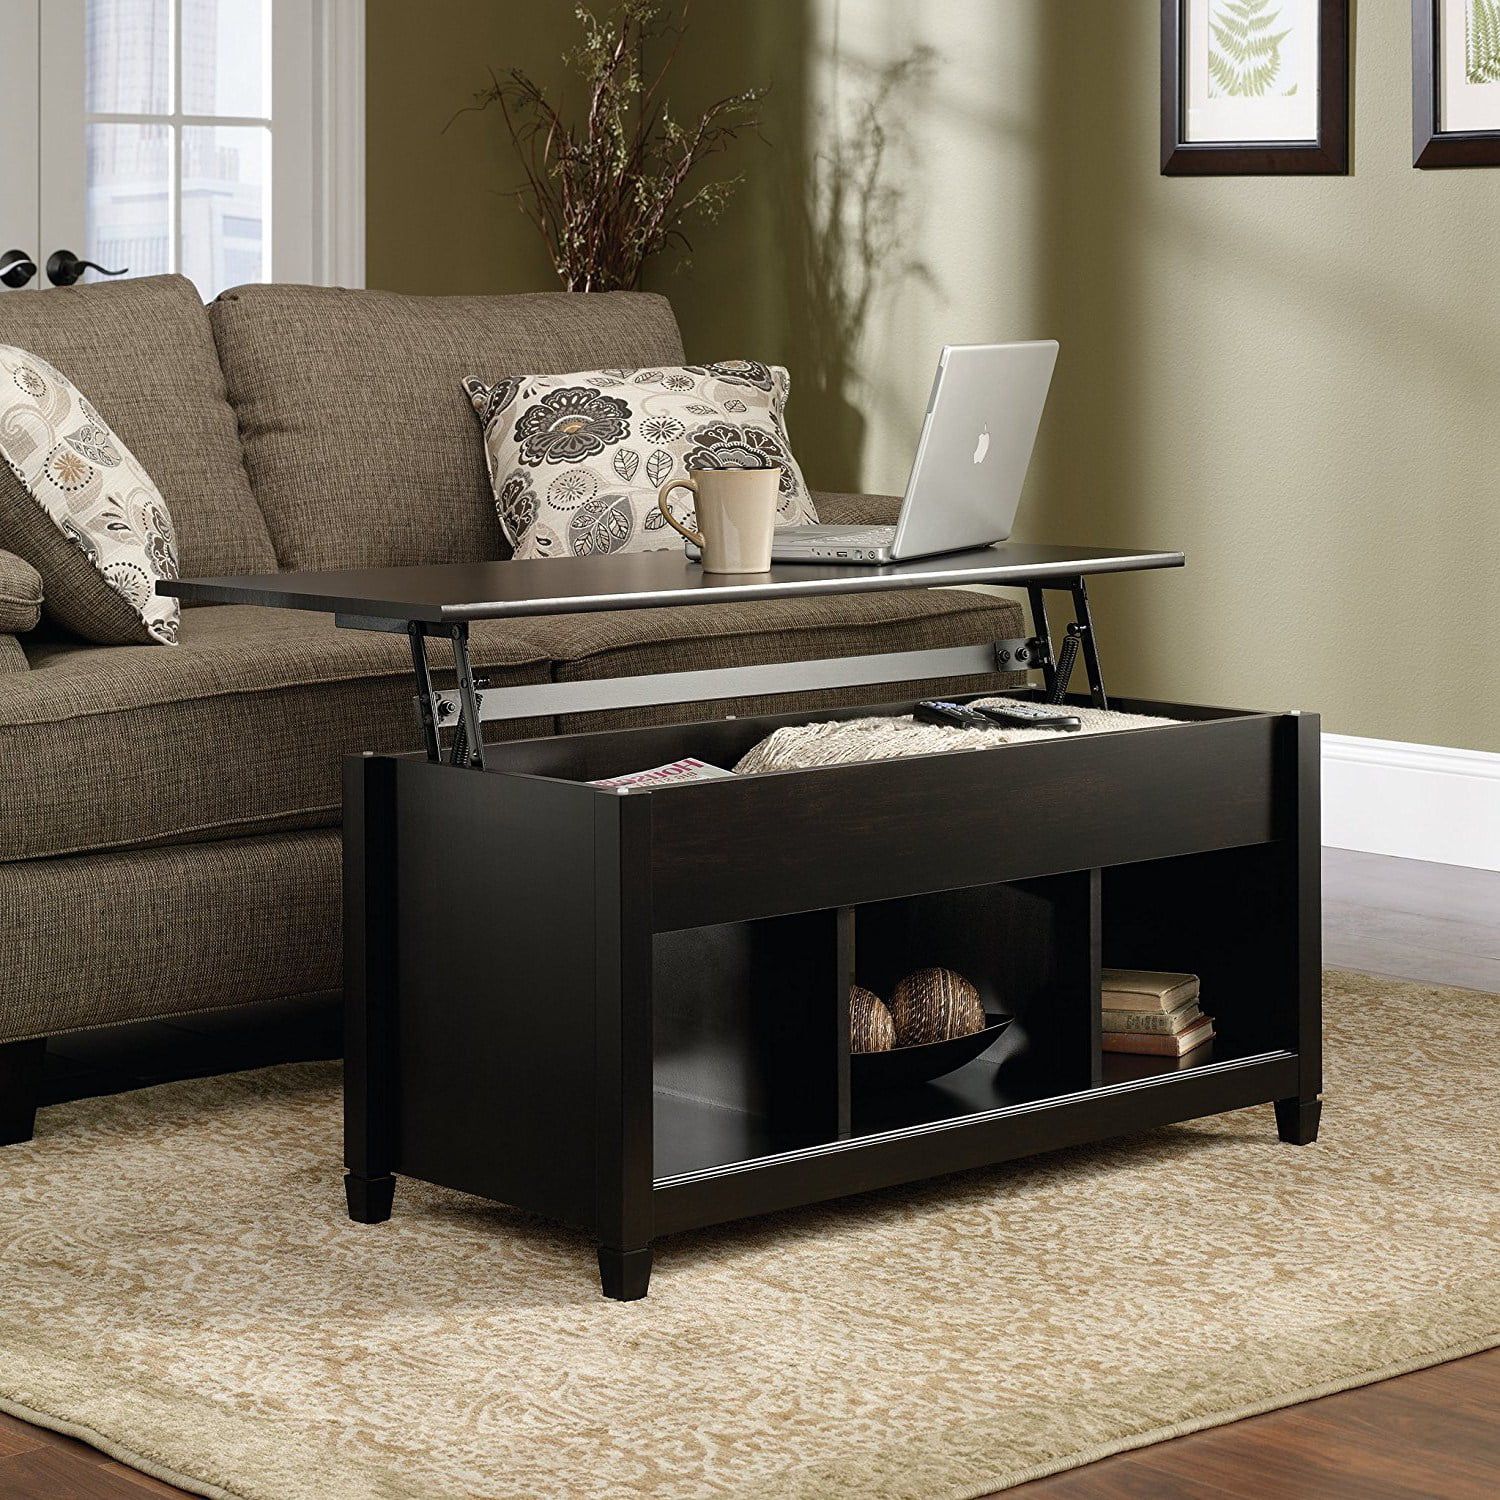 Zimtown Lift Up Top Coffee Table With Hidden Compartment End Rectangle With Regard To Modern Coffee Tables With Hidden Storage Compartments (Gallery 16 of 20)